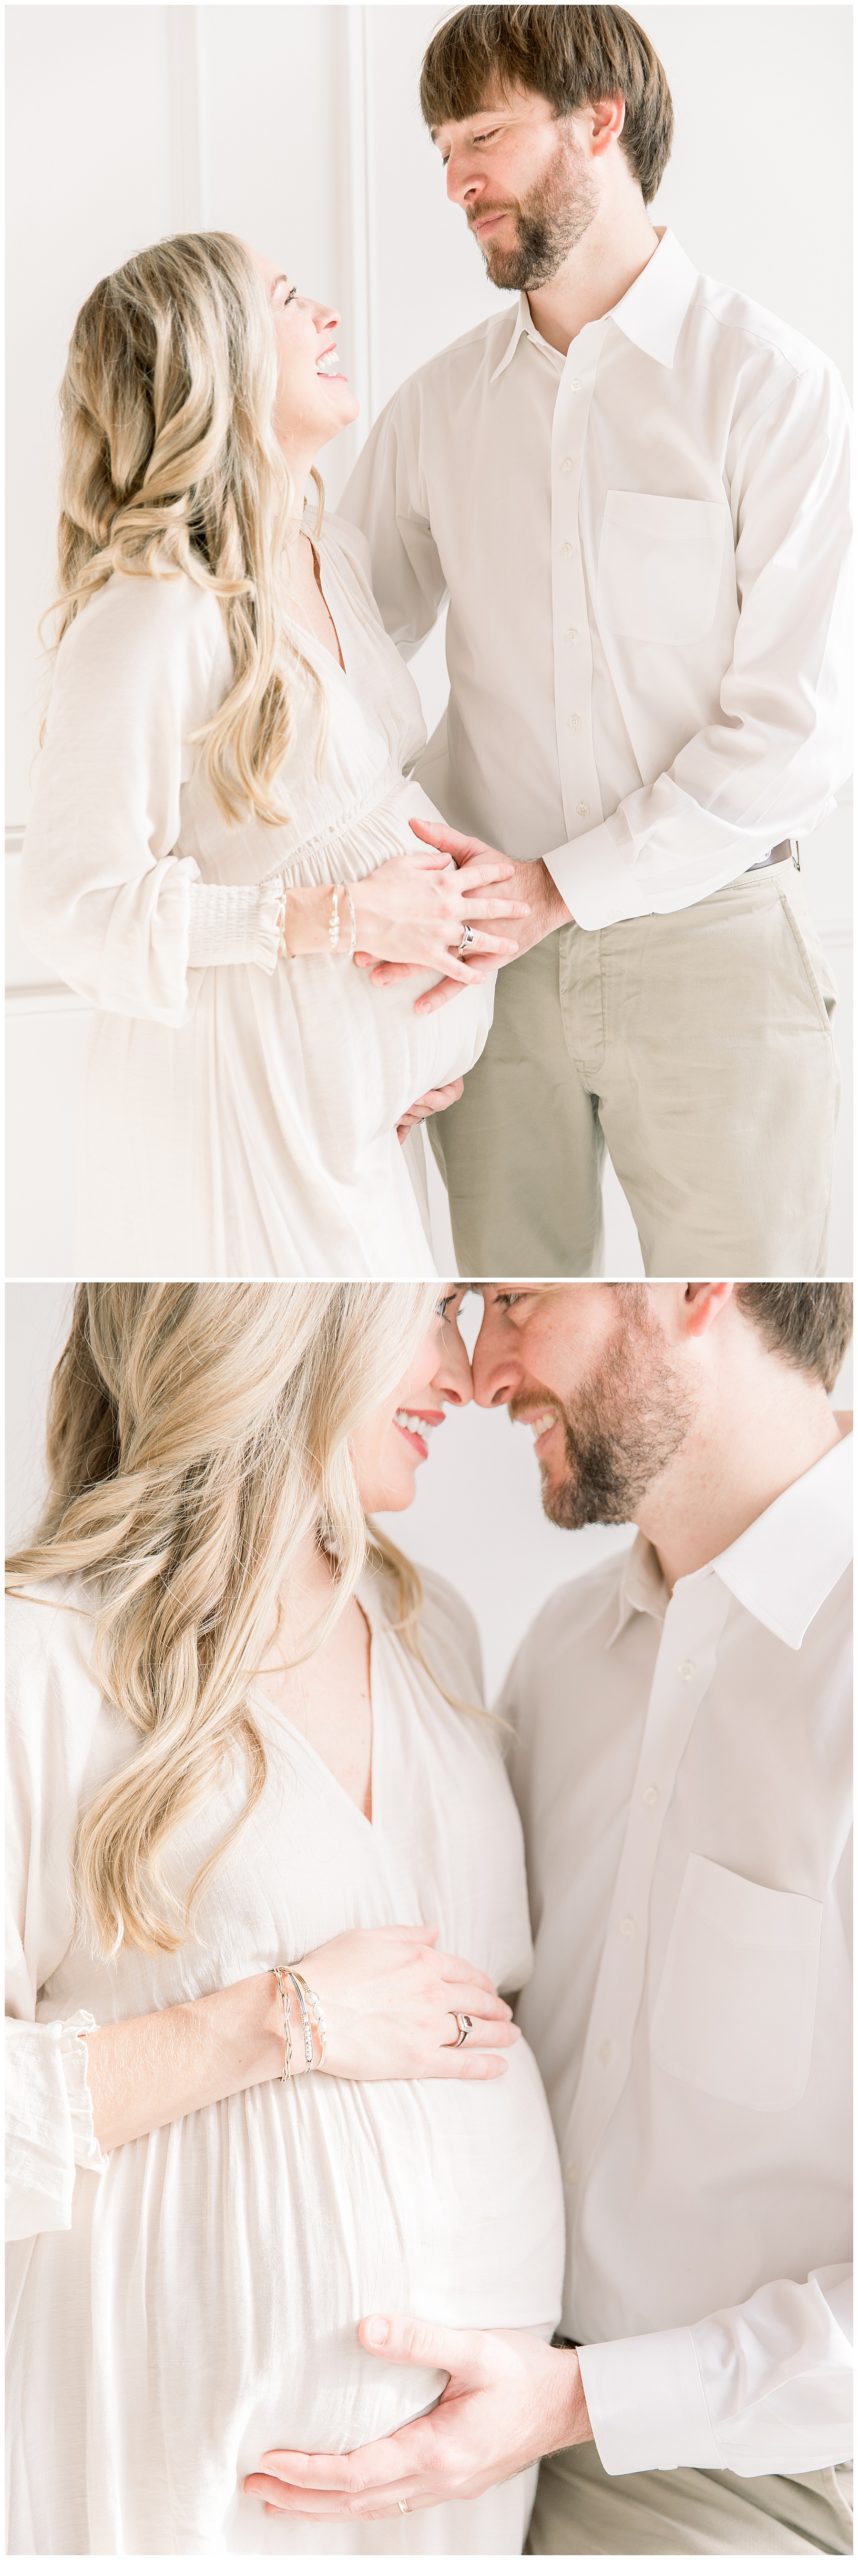 Dad and mom waiting for baby hands of growing bump by Katie Petrick Photography